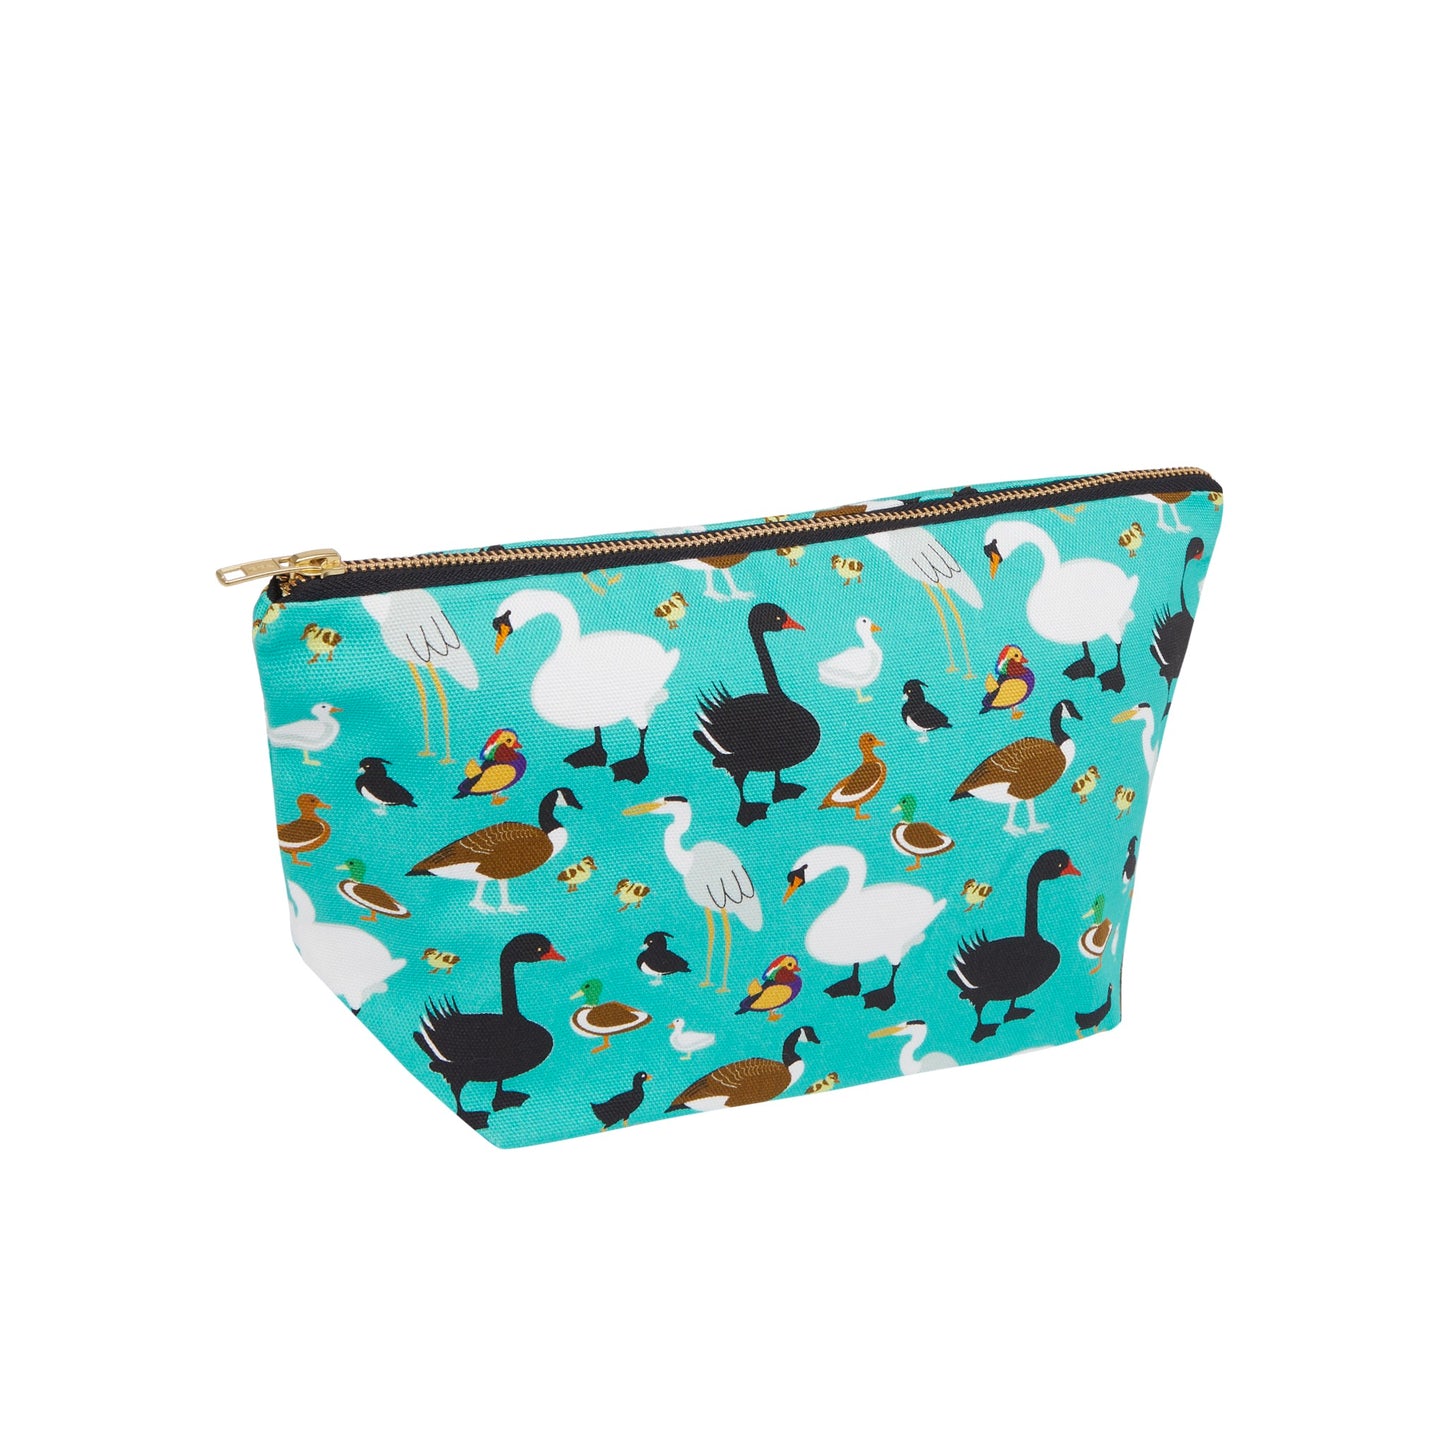 Ducks bag with zipped closure . Organic cotton with printed waterproof lining